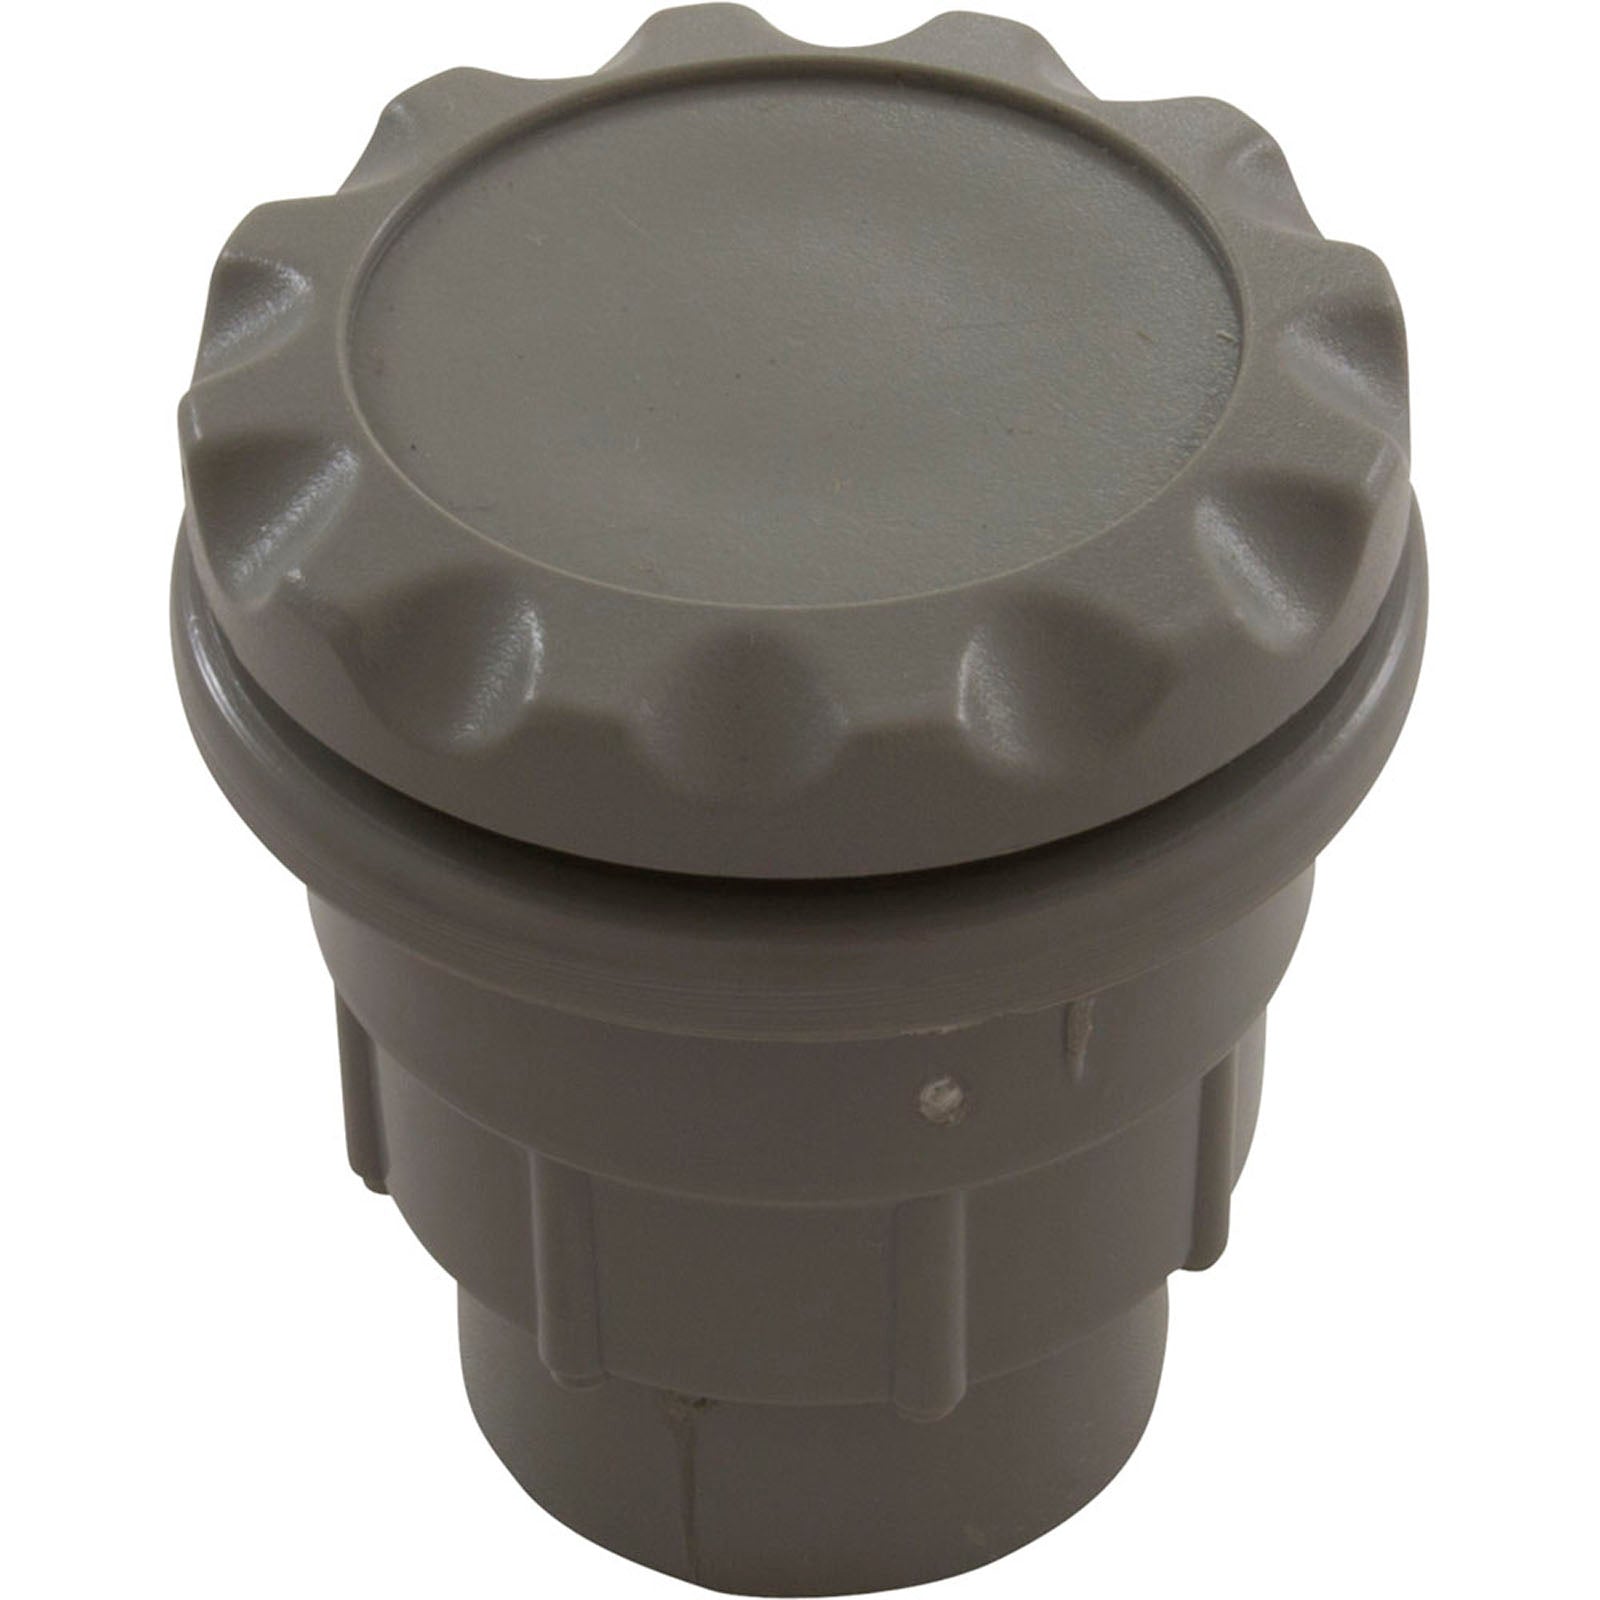 Waterway Gunite Air Control "A" Style (Fits Inside 1 1/2" Pipe Or 1/2" Slip) [Gray] (660-3407)